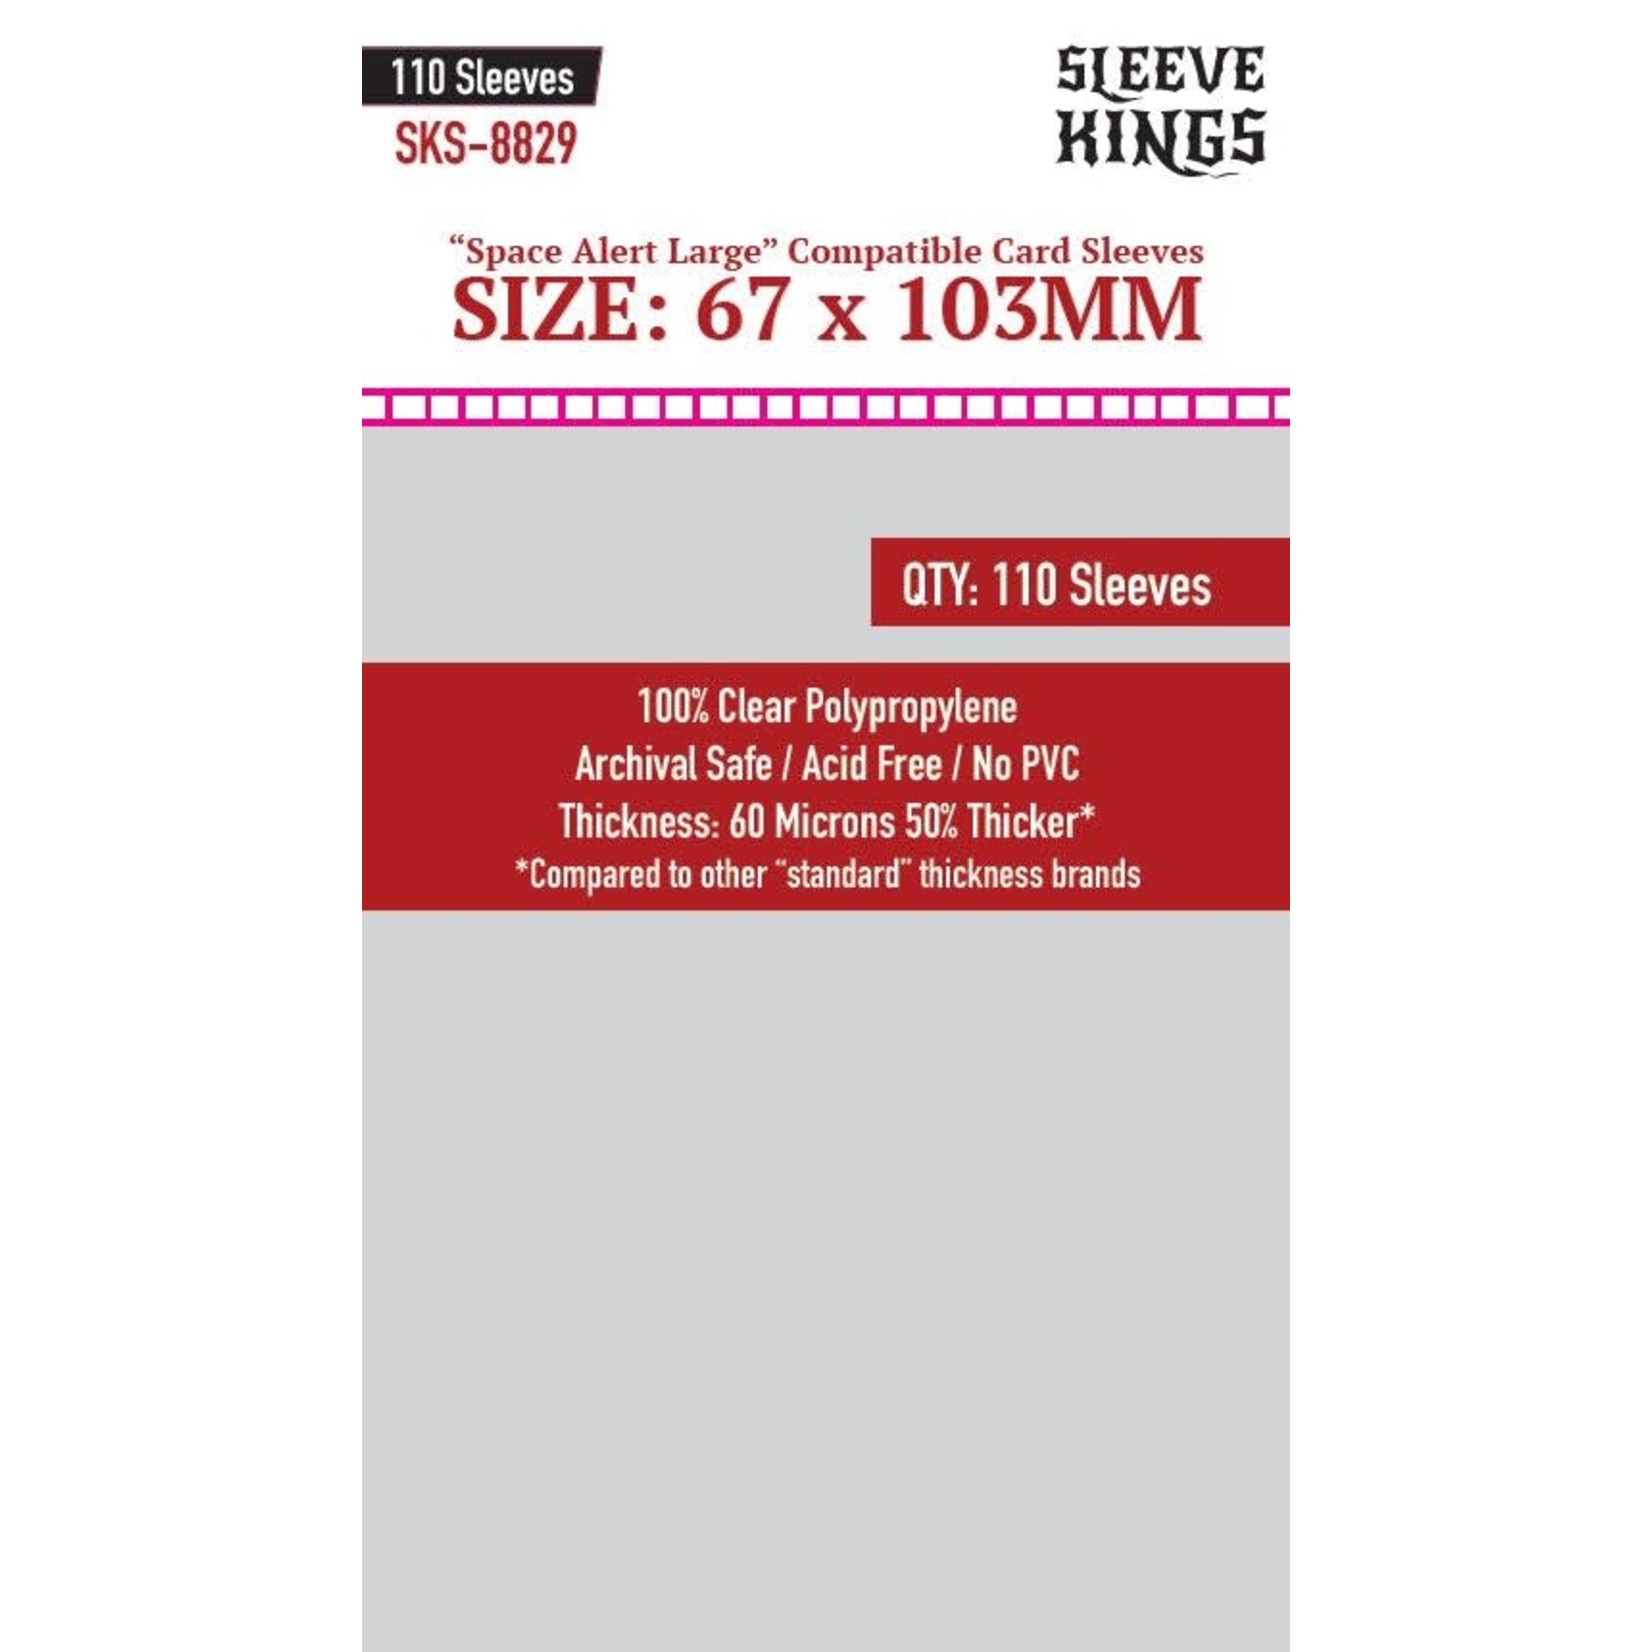 Sleeve Kings Card Sleeves: "Space Alert" Compatible, Large (67x103mm, 110 Count)